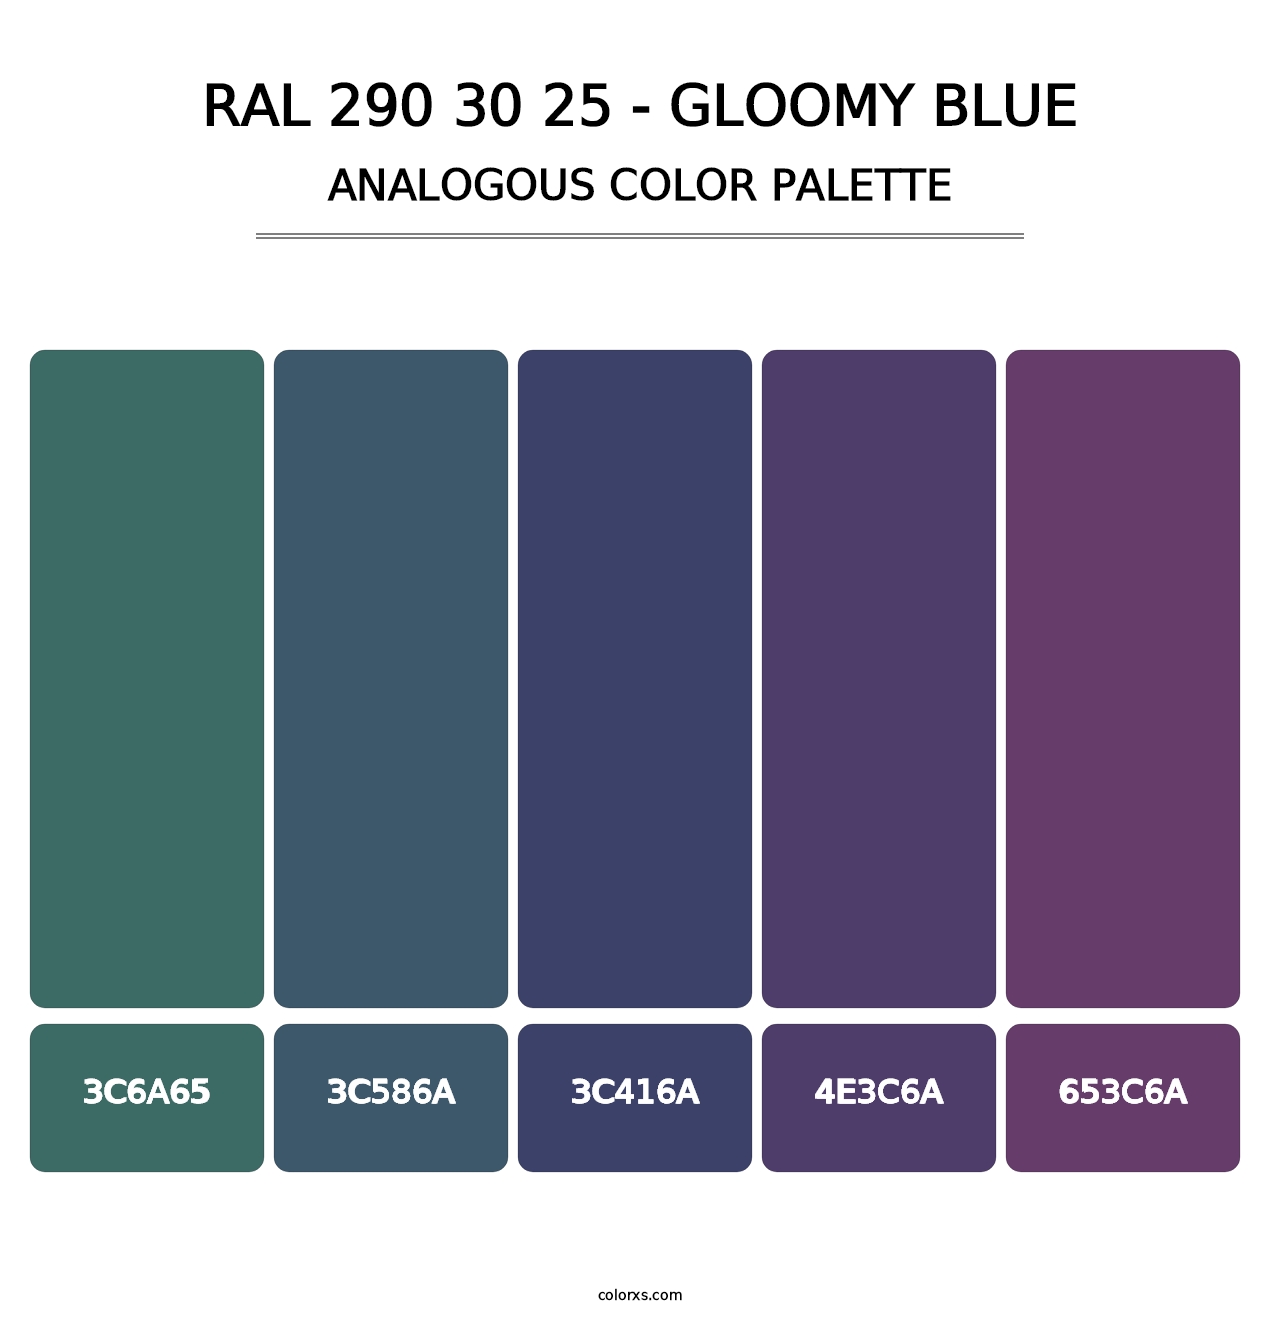 RAL 290 30 25 - Gloomy Blue - Analogous Color Palette